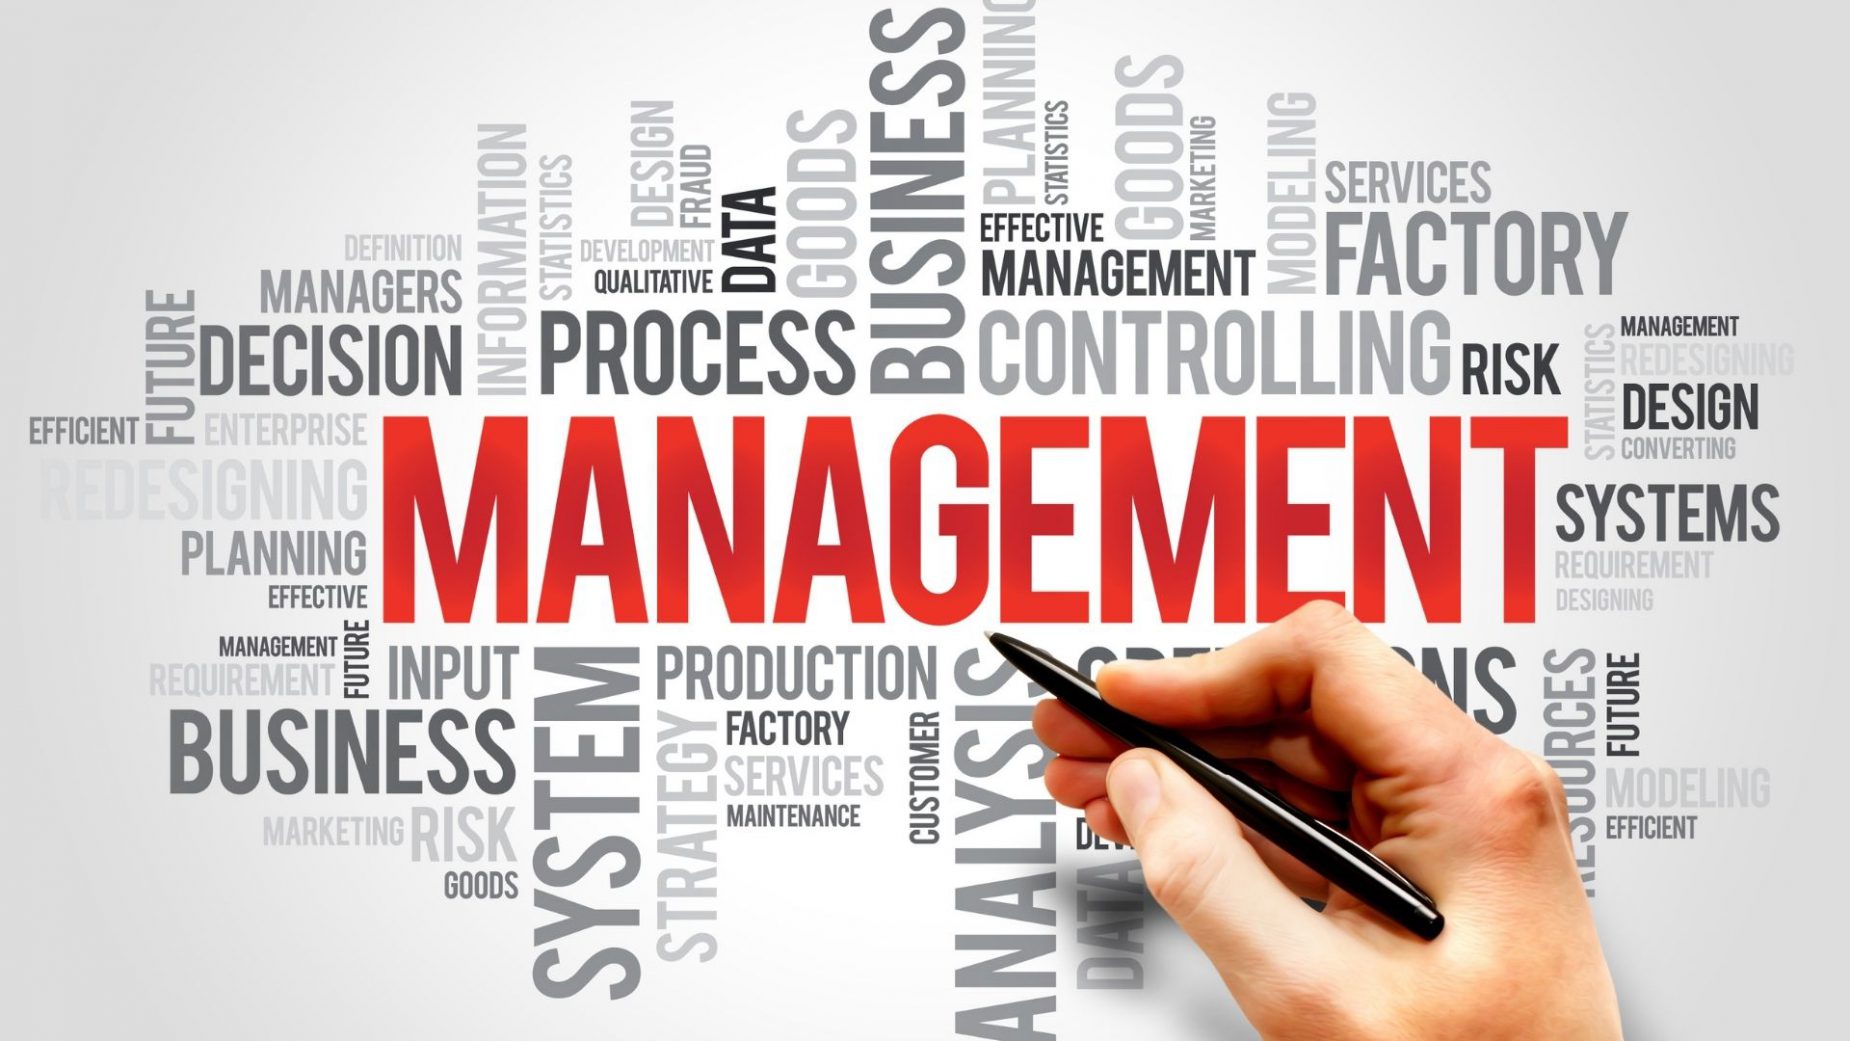 Management Consulting Services Market